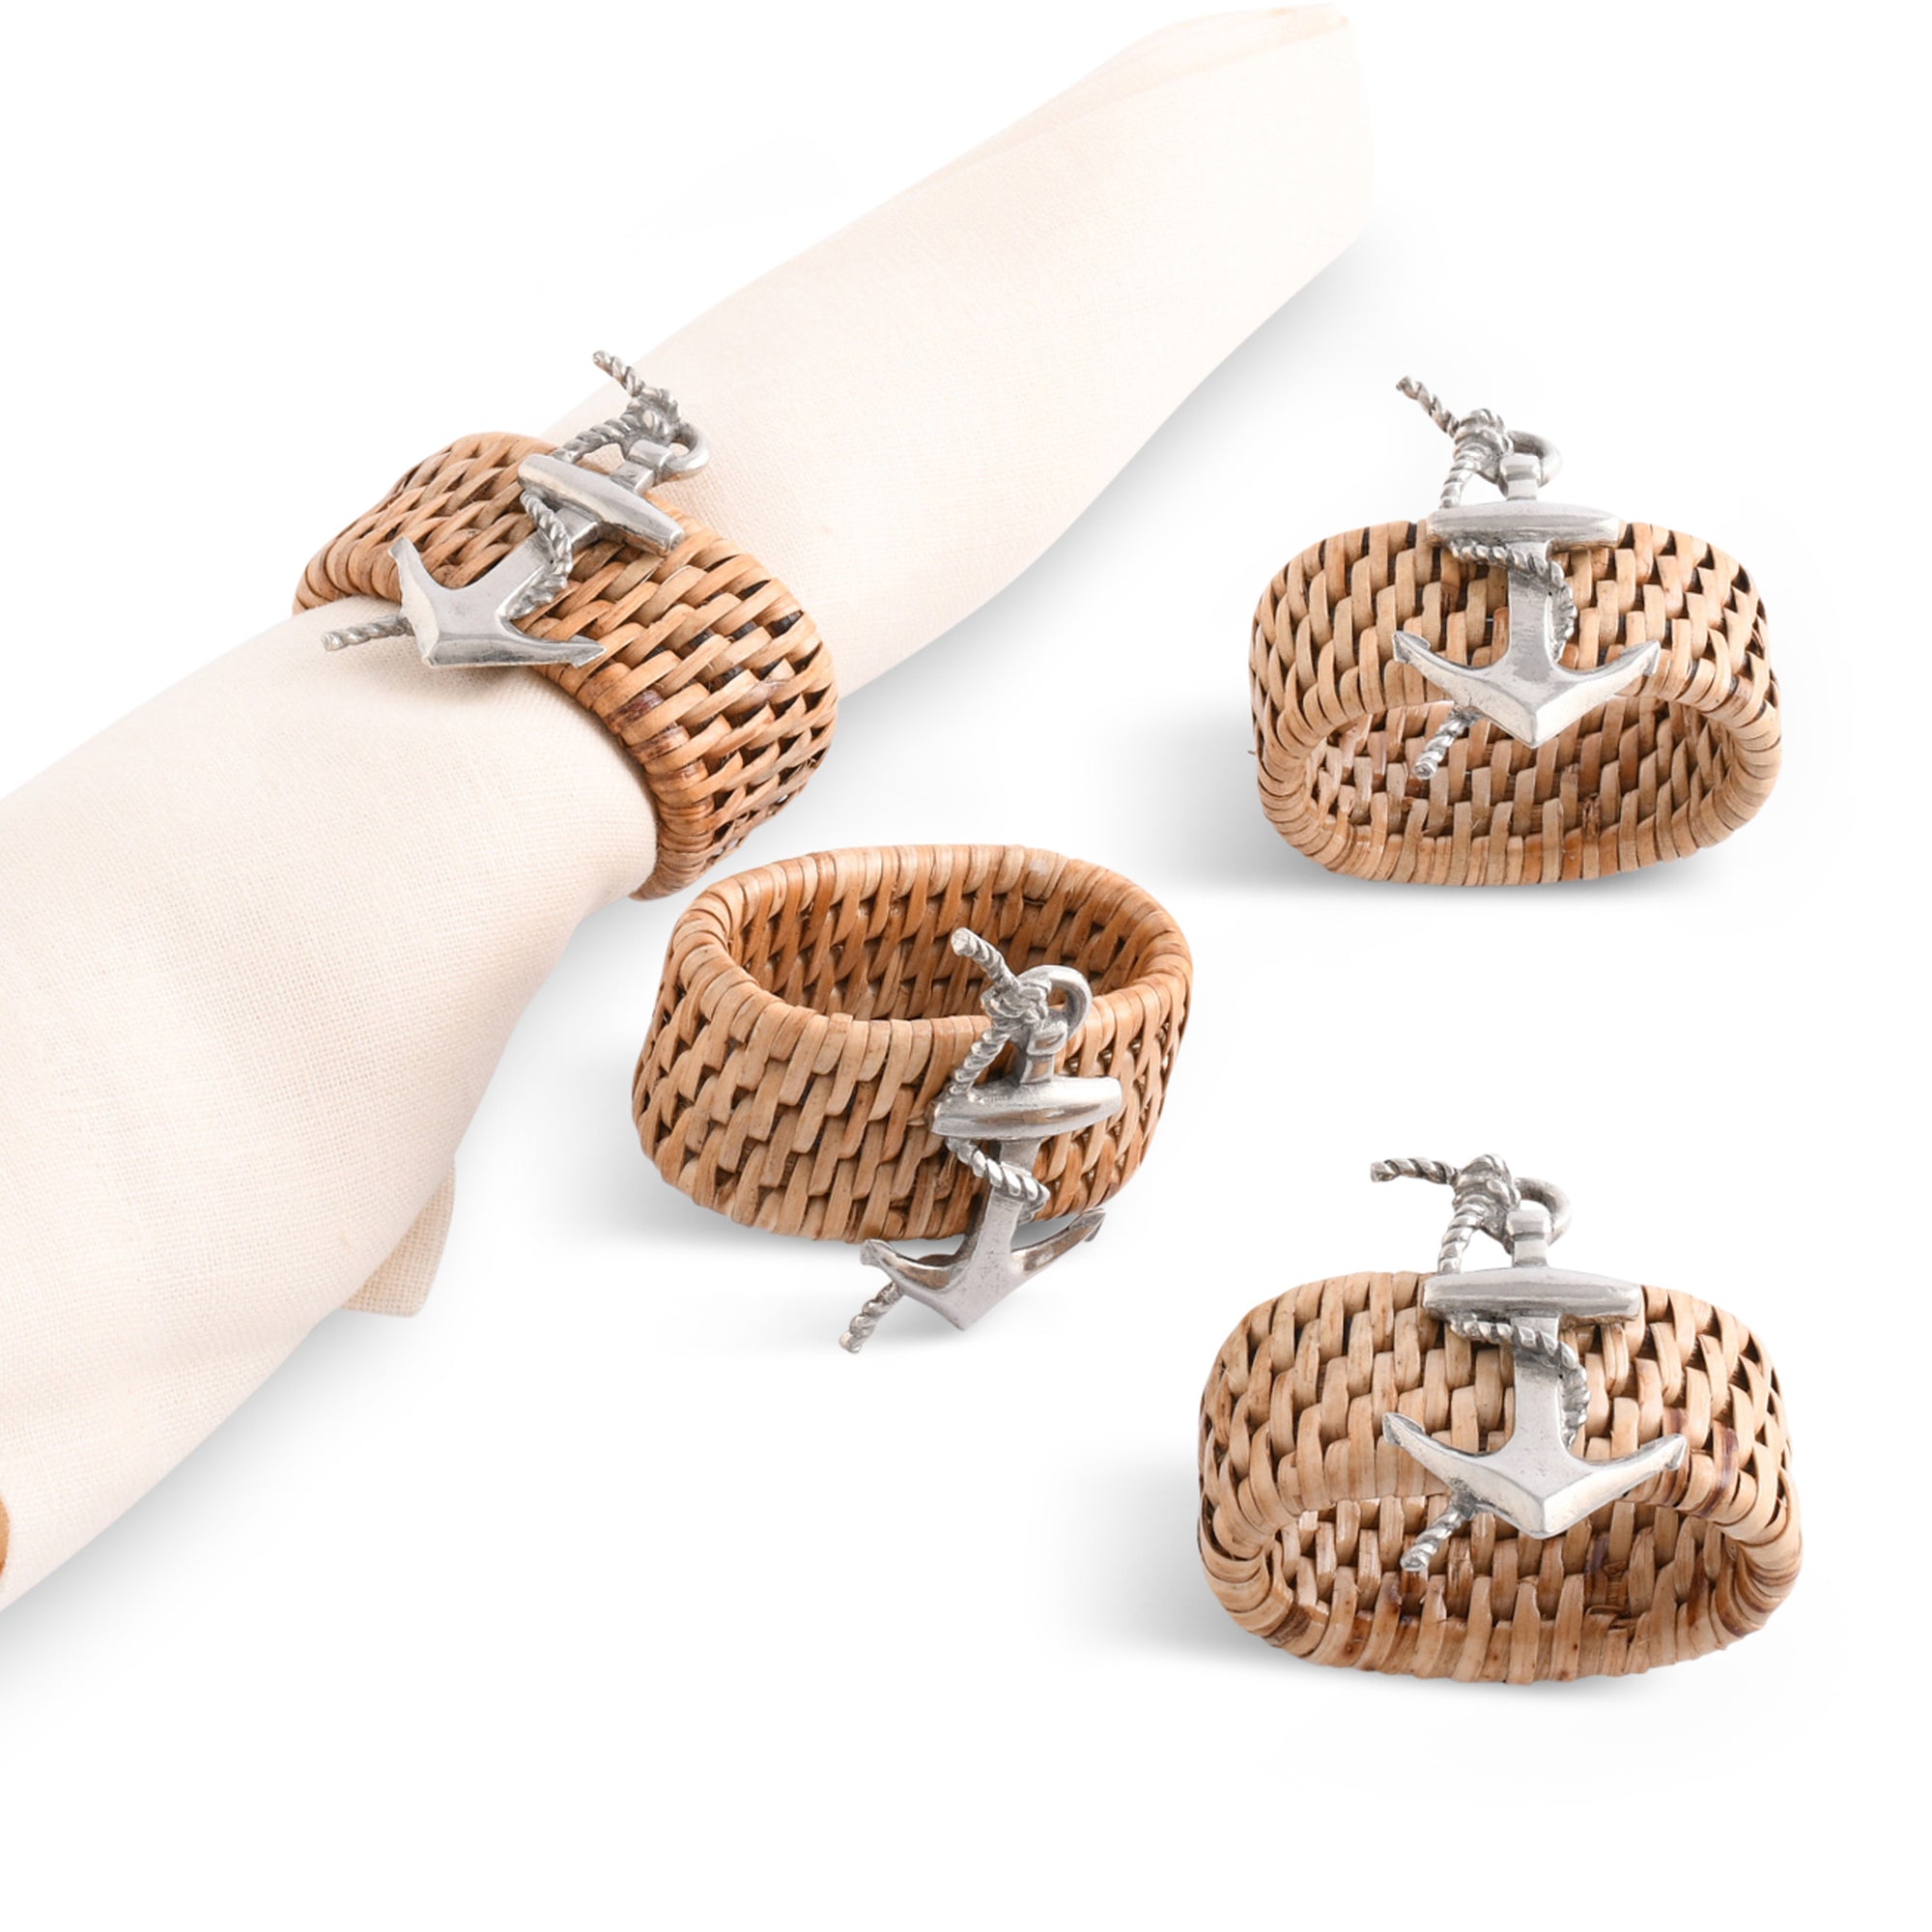 Vagabond House Anchor Hand Woven Wicker Rattan Napkin Ring - Set of 4 Product Image